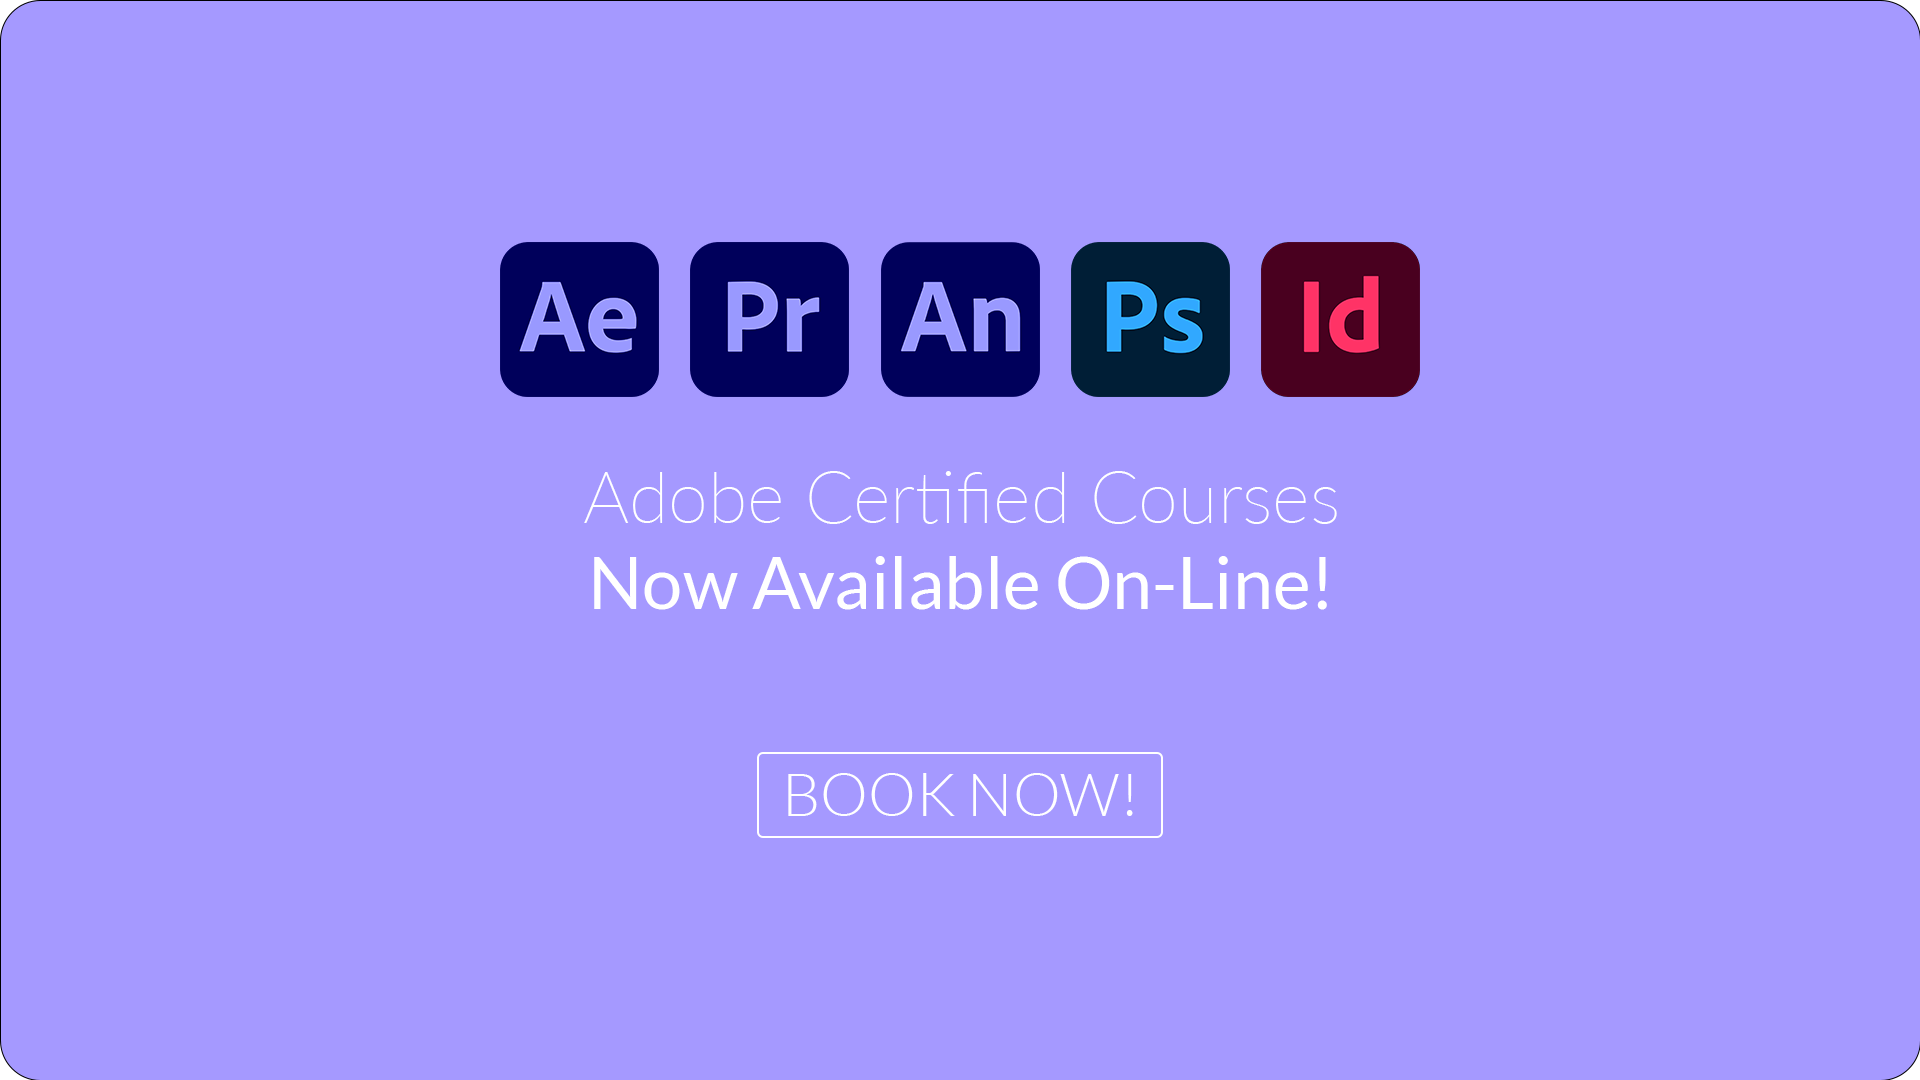 Adobe Premiere Pro and After Effects courses